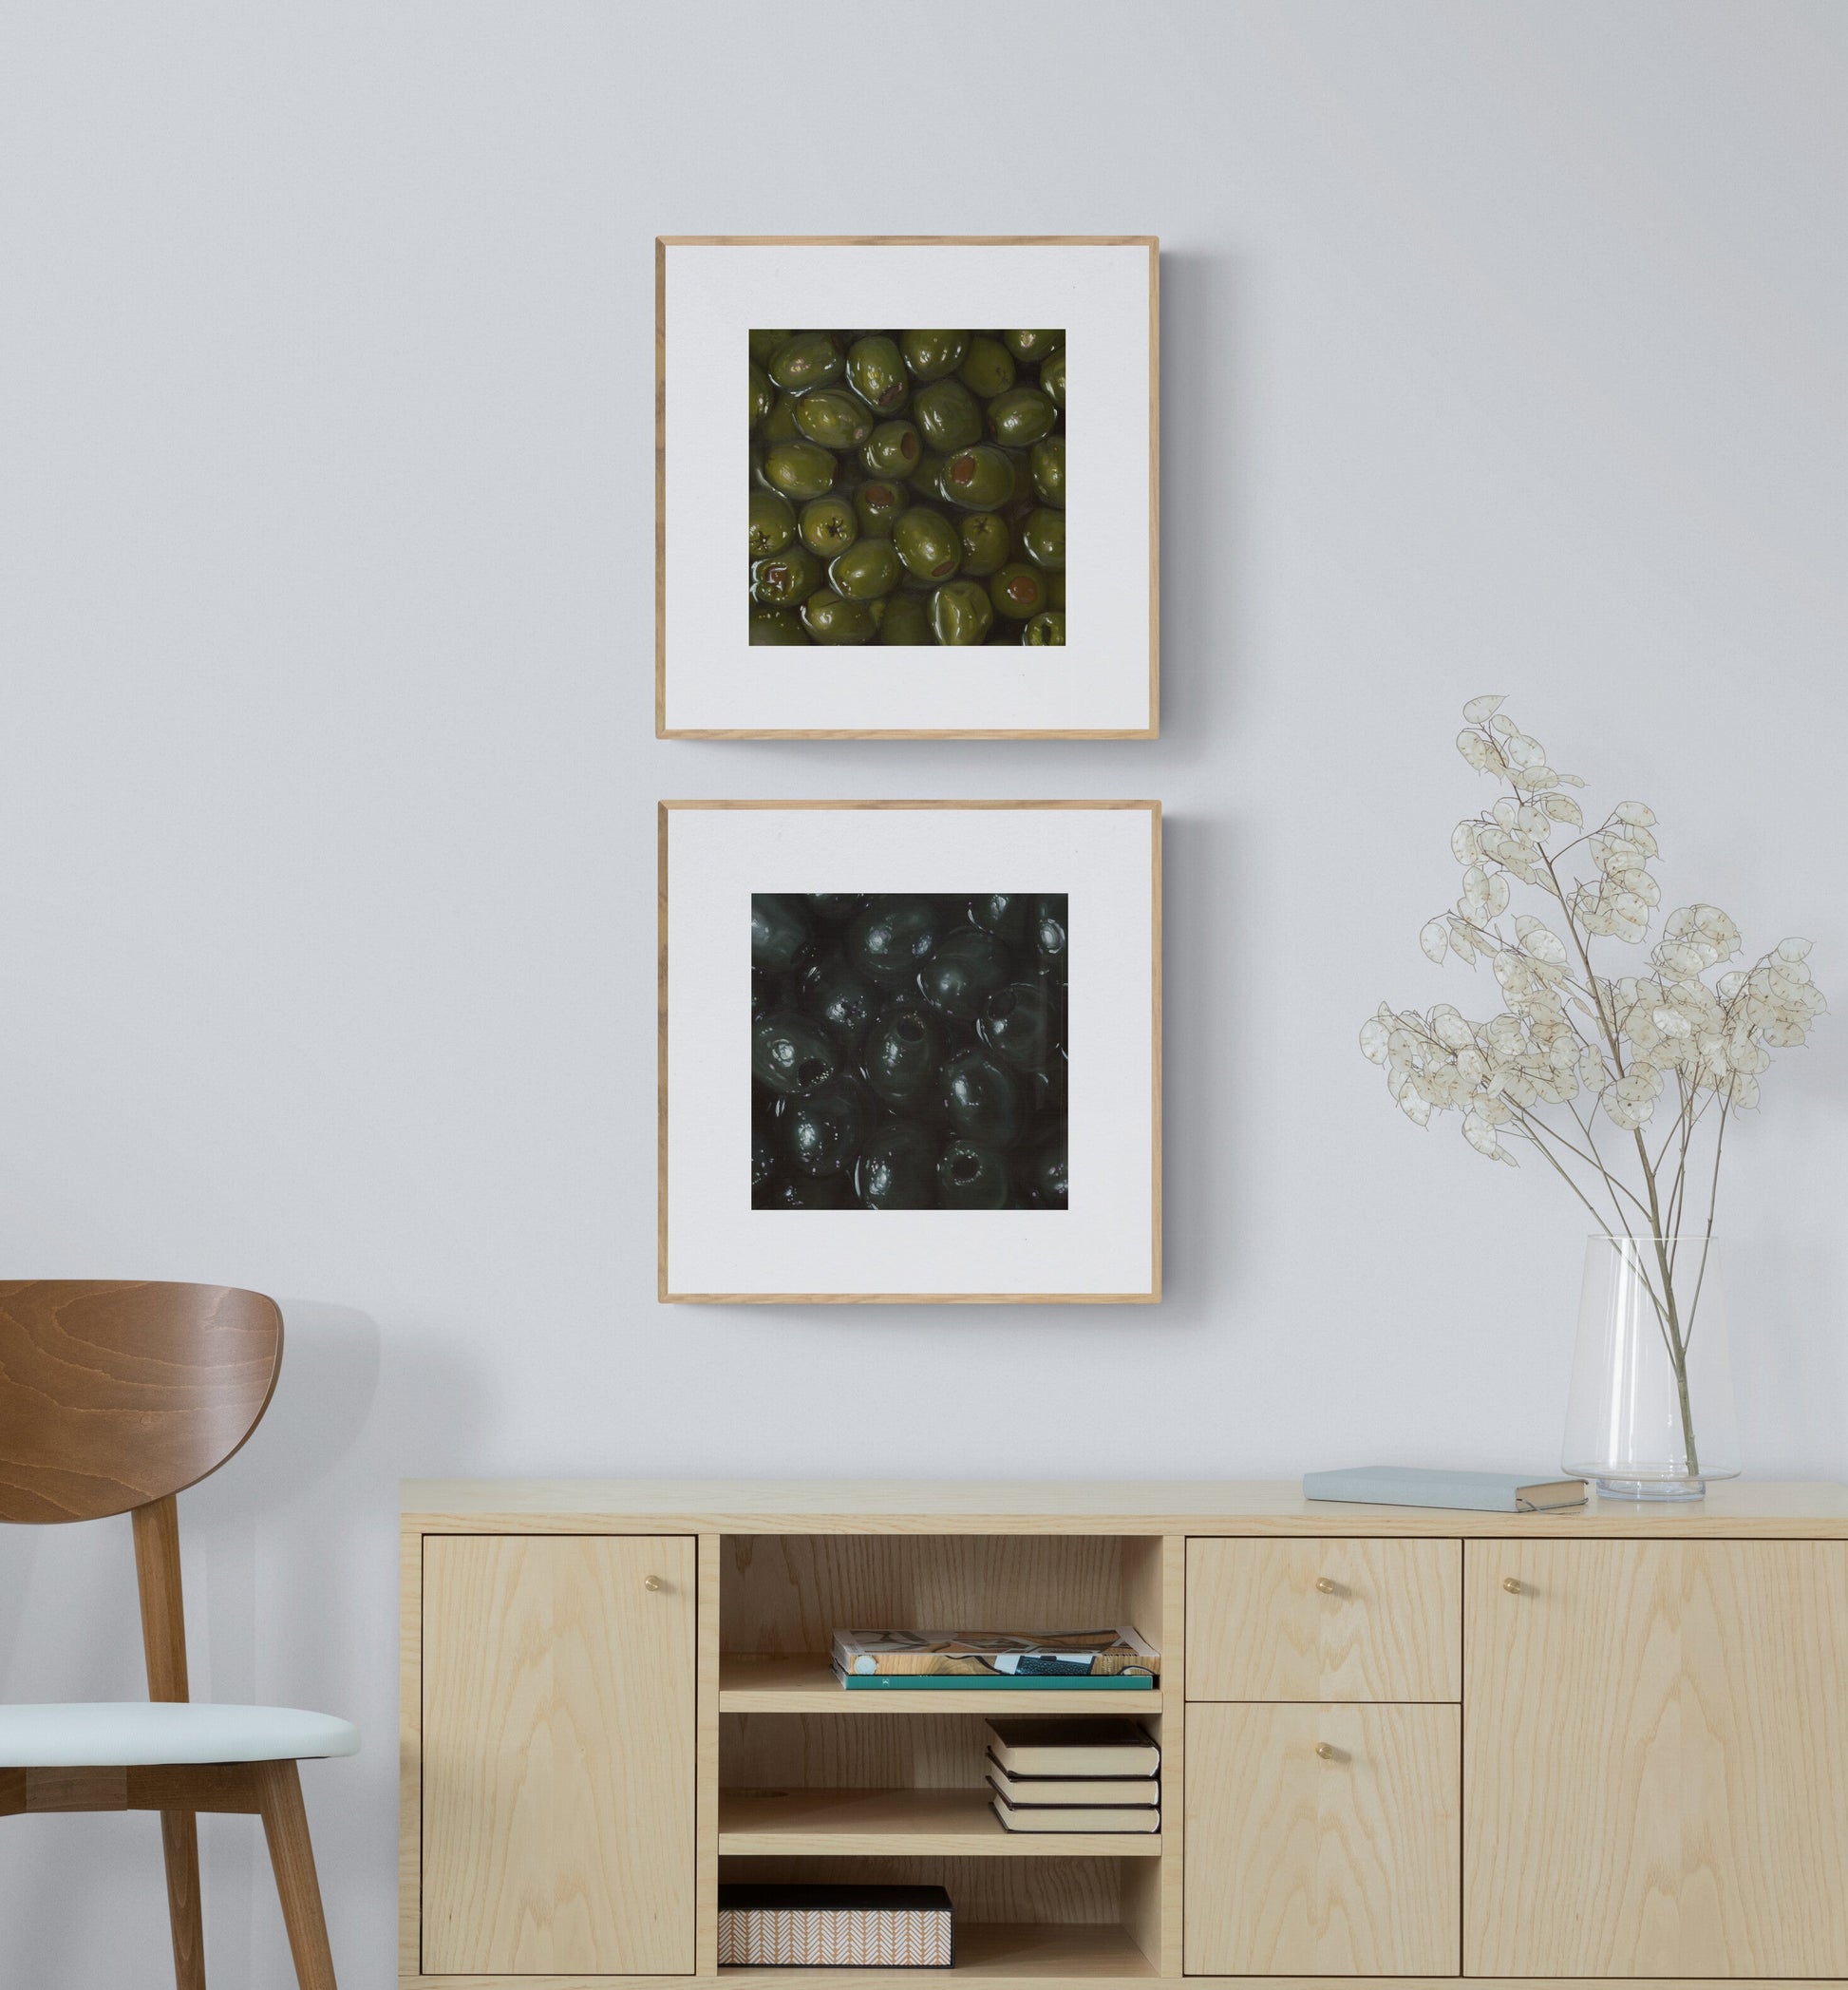 The original paintings “Green Olives” and “Black Olives” by Hannah Kilby from Hannah Michelle Studios, displayed as fine art prints.